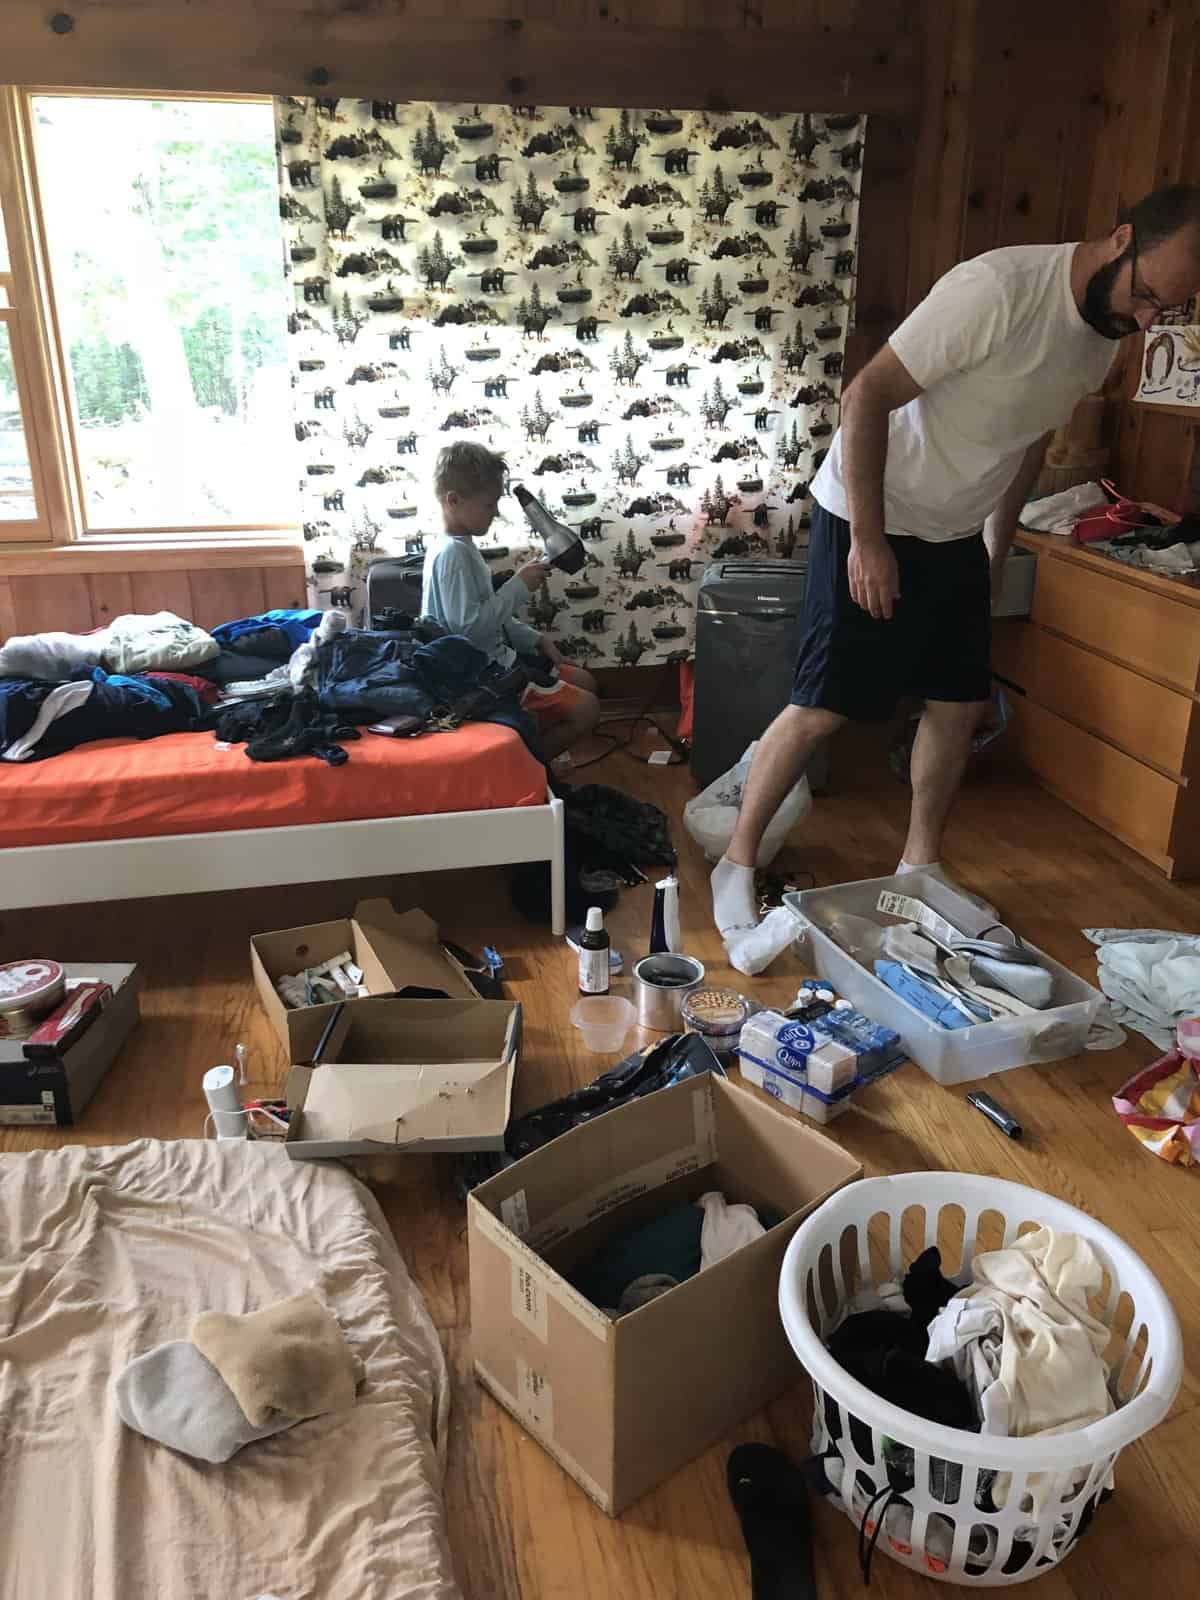 Packing in a messy room, to move on a sailboat